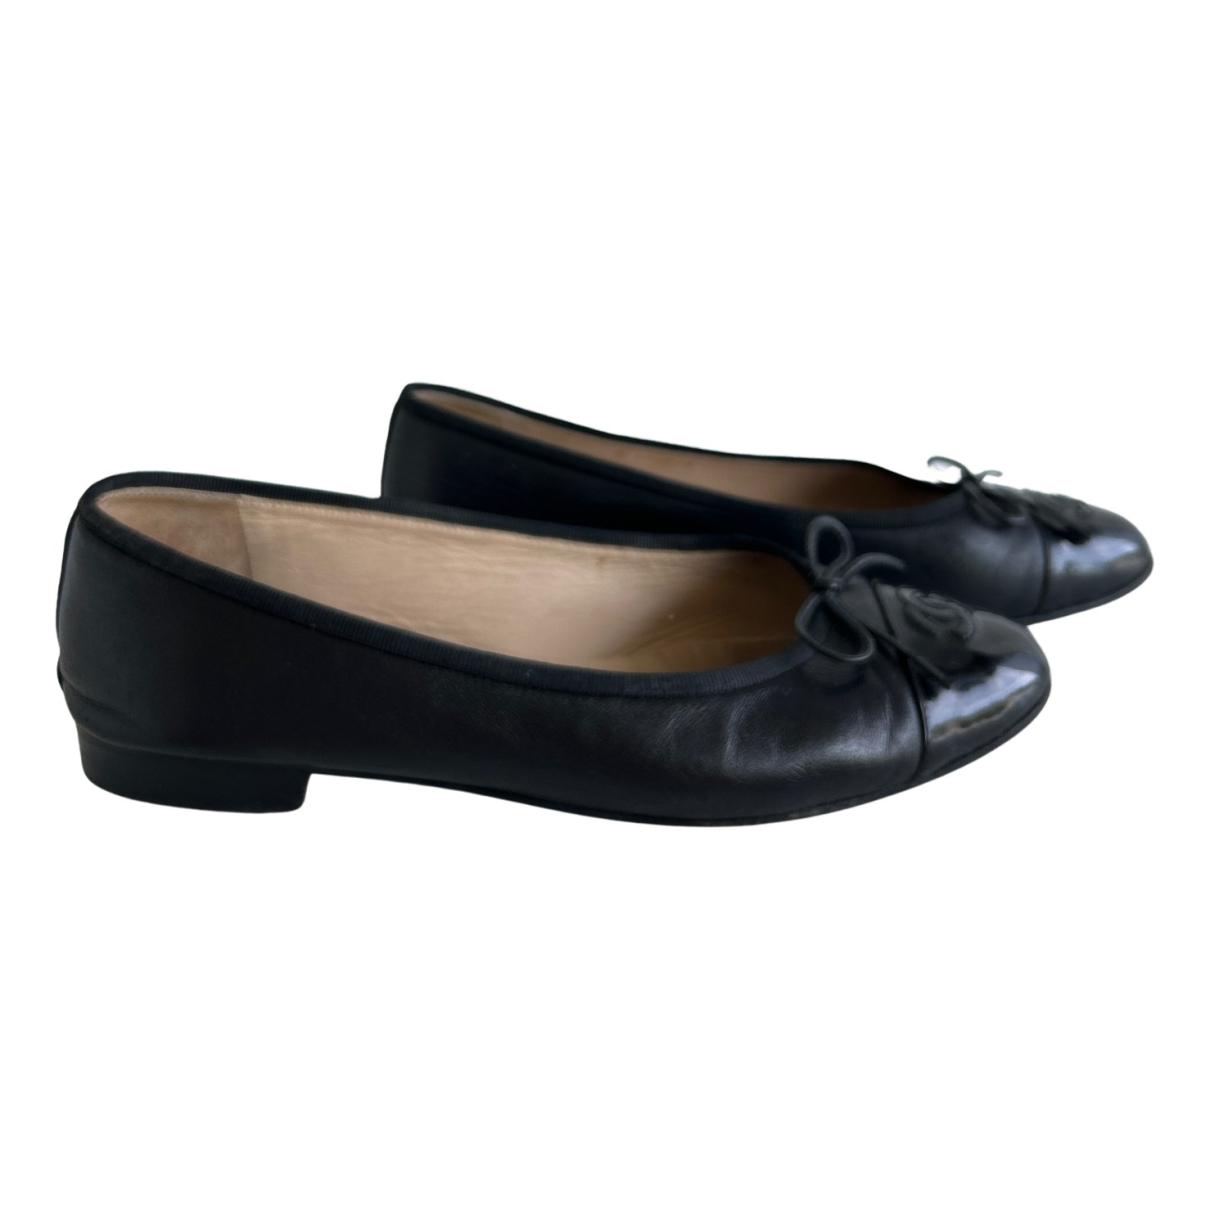 Leather ballet flats Chanel Black size 39.5 EU in Leather - 36354851